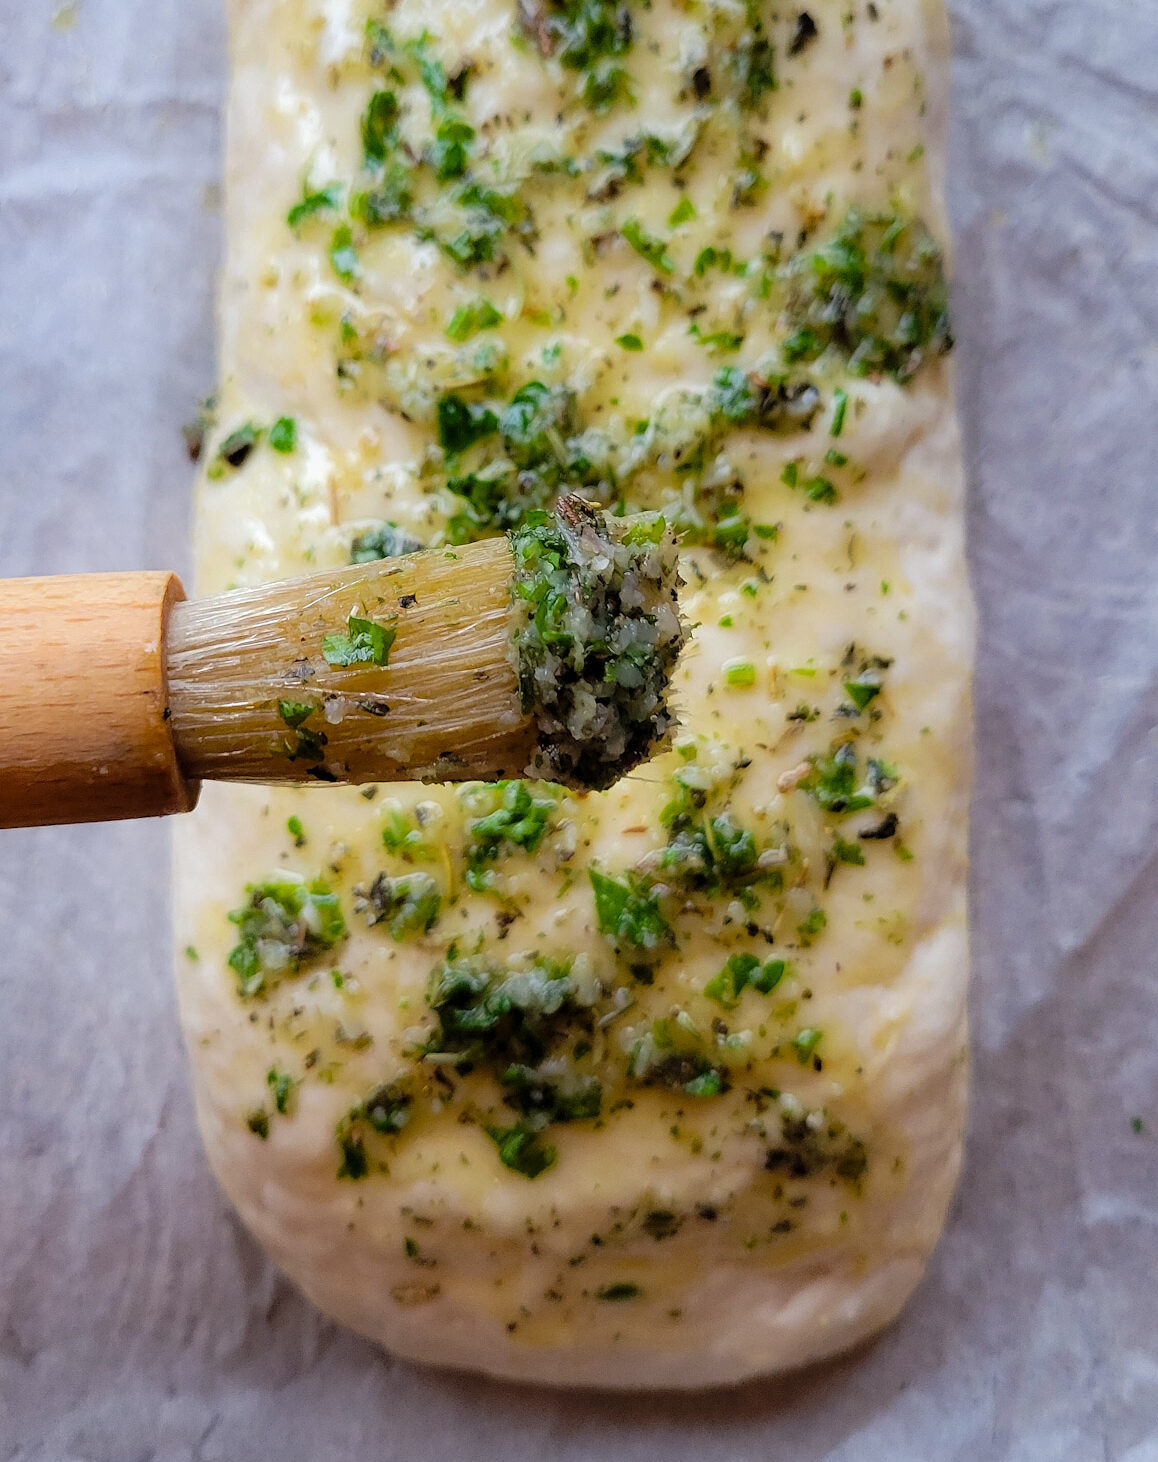 A rolled up Stromboli or pizza, being brushed with a garlic herb butter sauce.